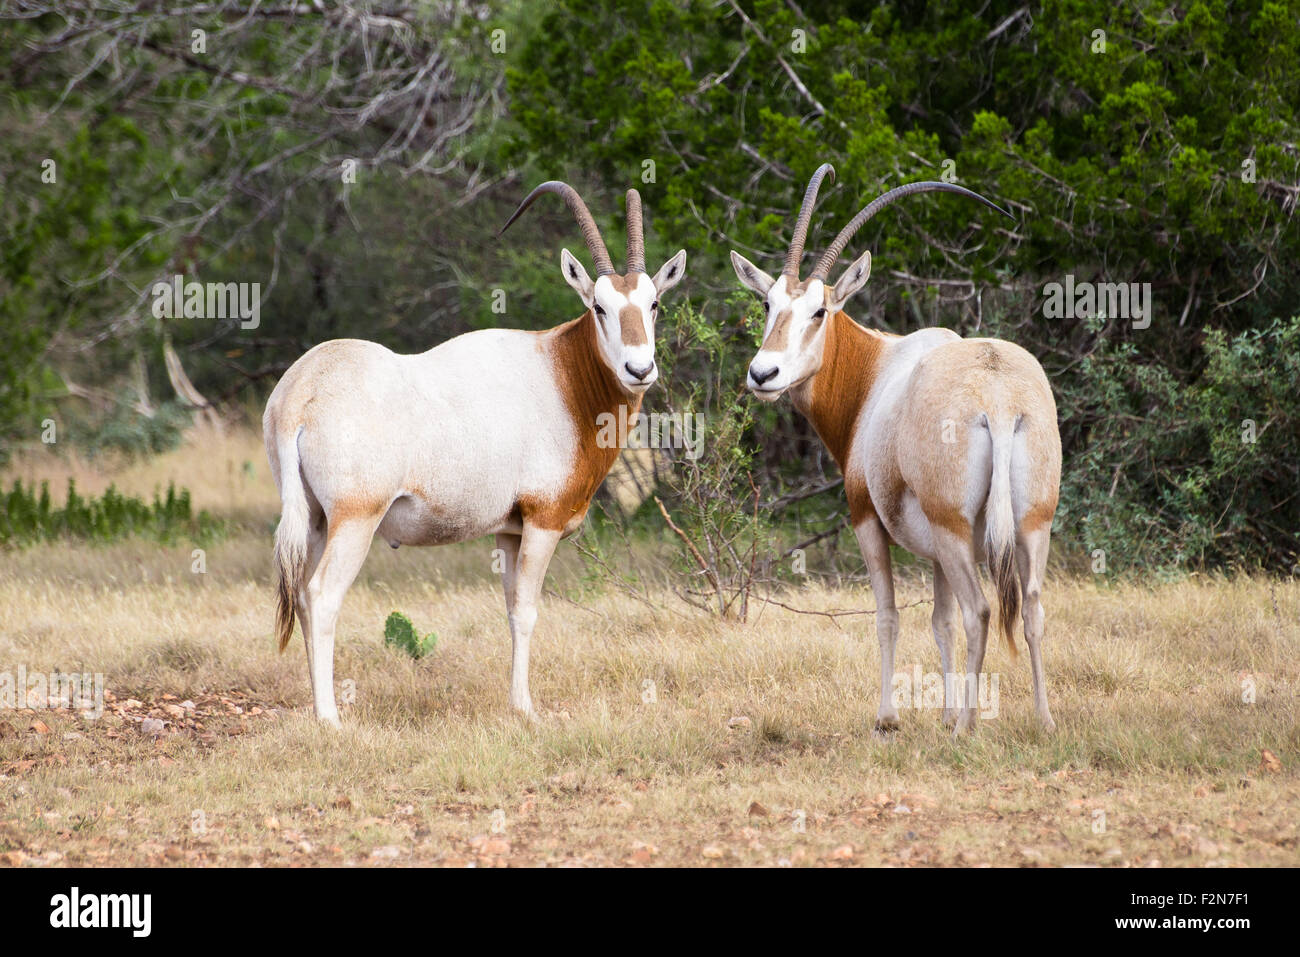 Wild Scimitar Horned Oryx Bull and Cow standing towards eachother. These animals are extinct in their native lands of Africa. Stock Photo